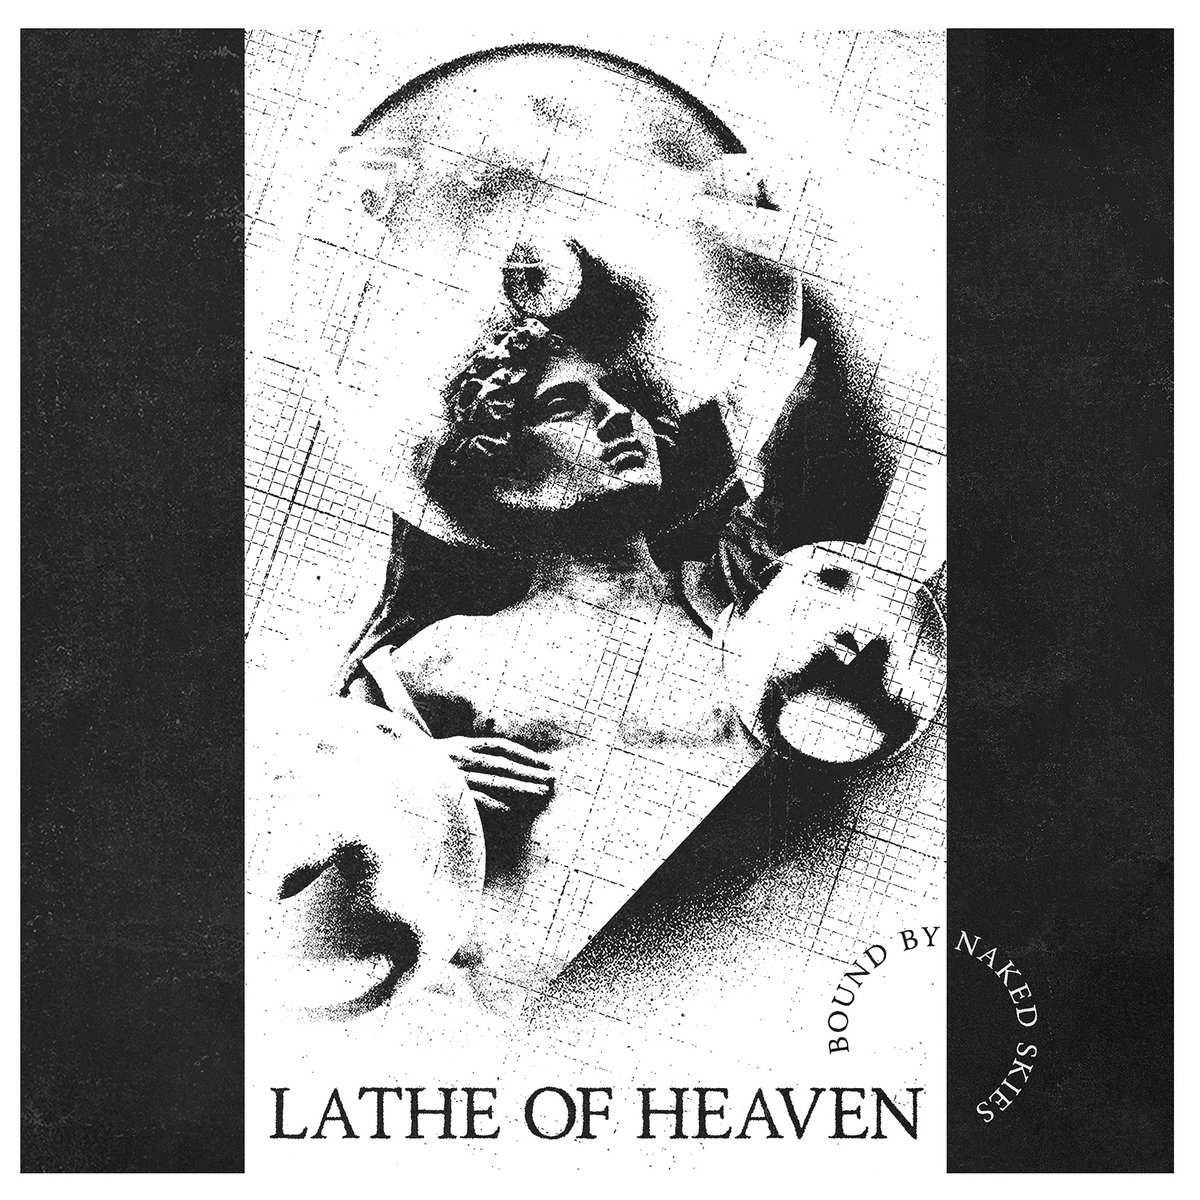 Post-punk shivers – Lathe of Heaven – Bound by Naked Skies